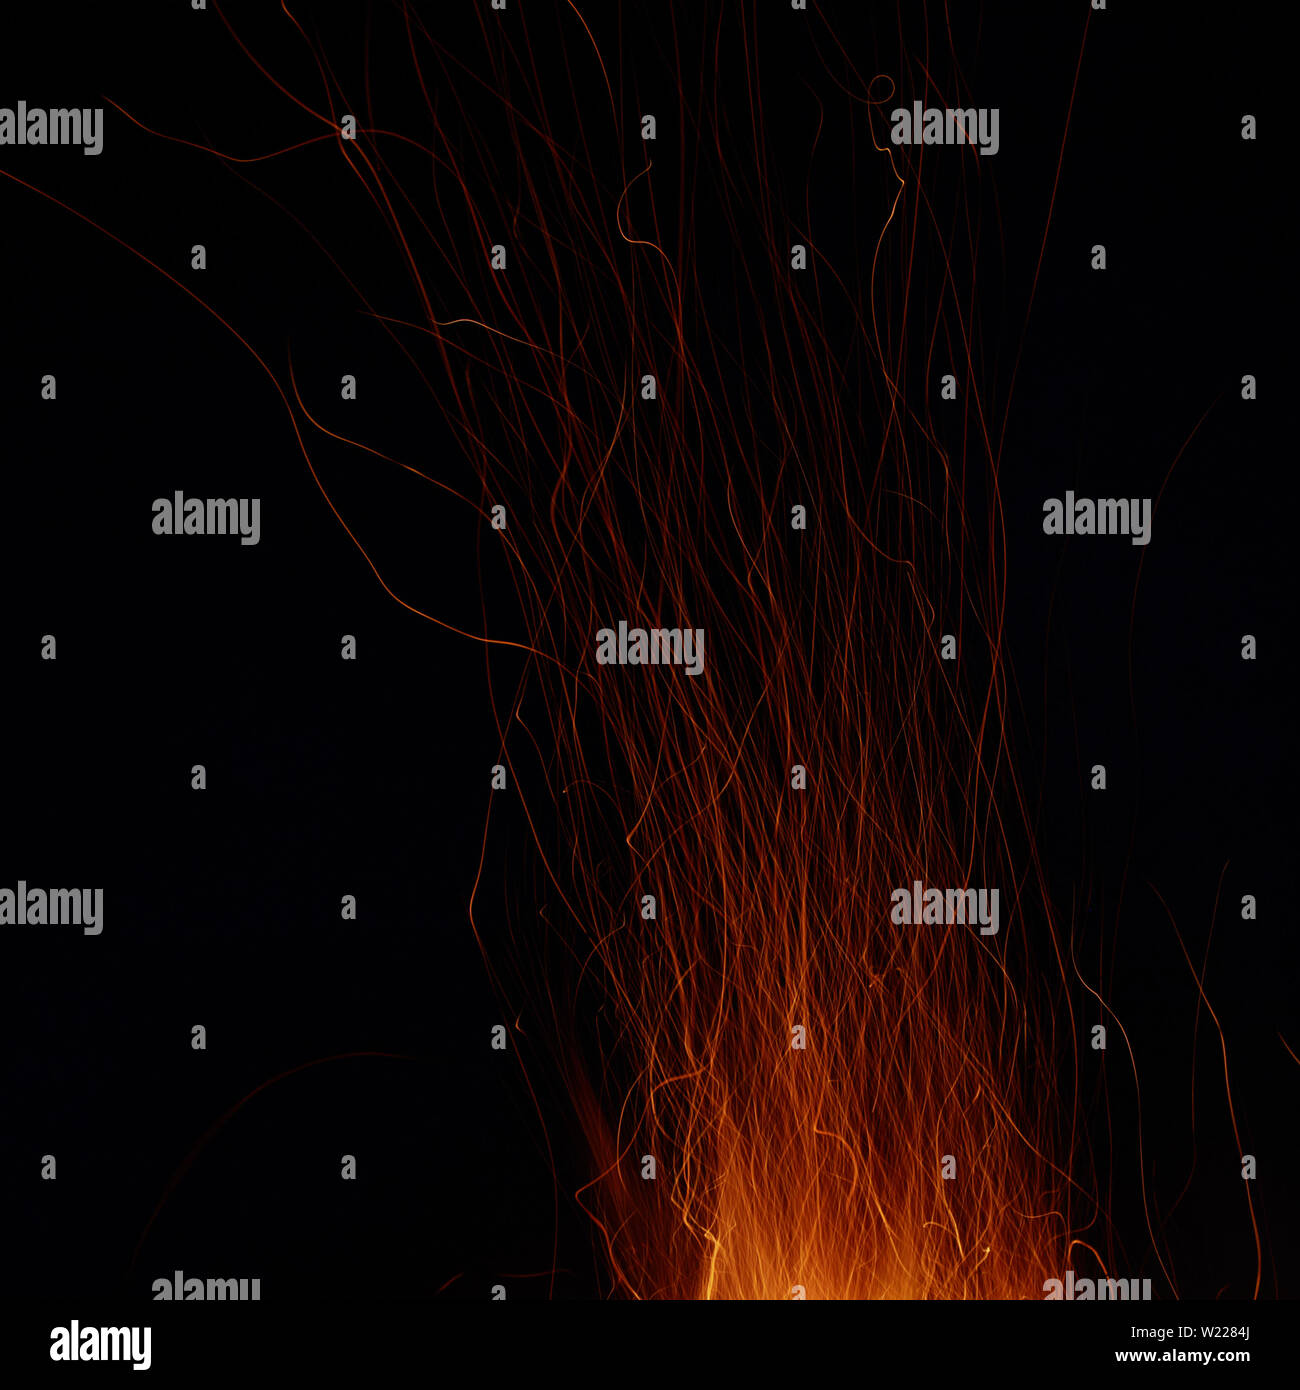 Abstract image of a fire sparks on a black background. Shot on a long exposure Stock Photo